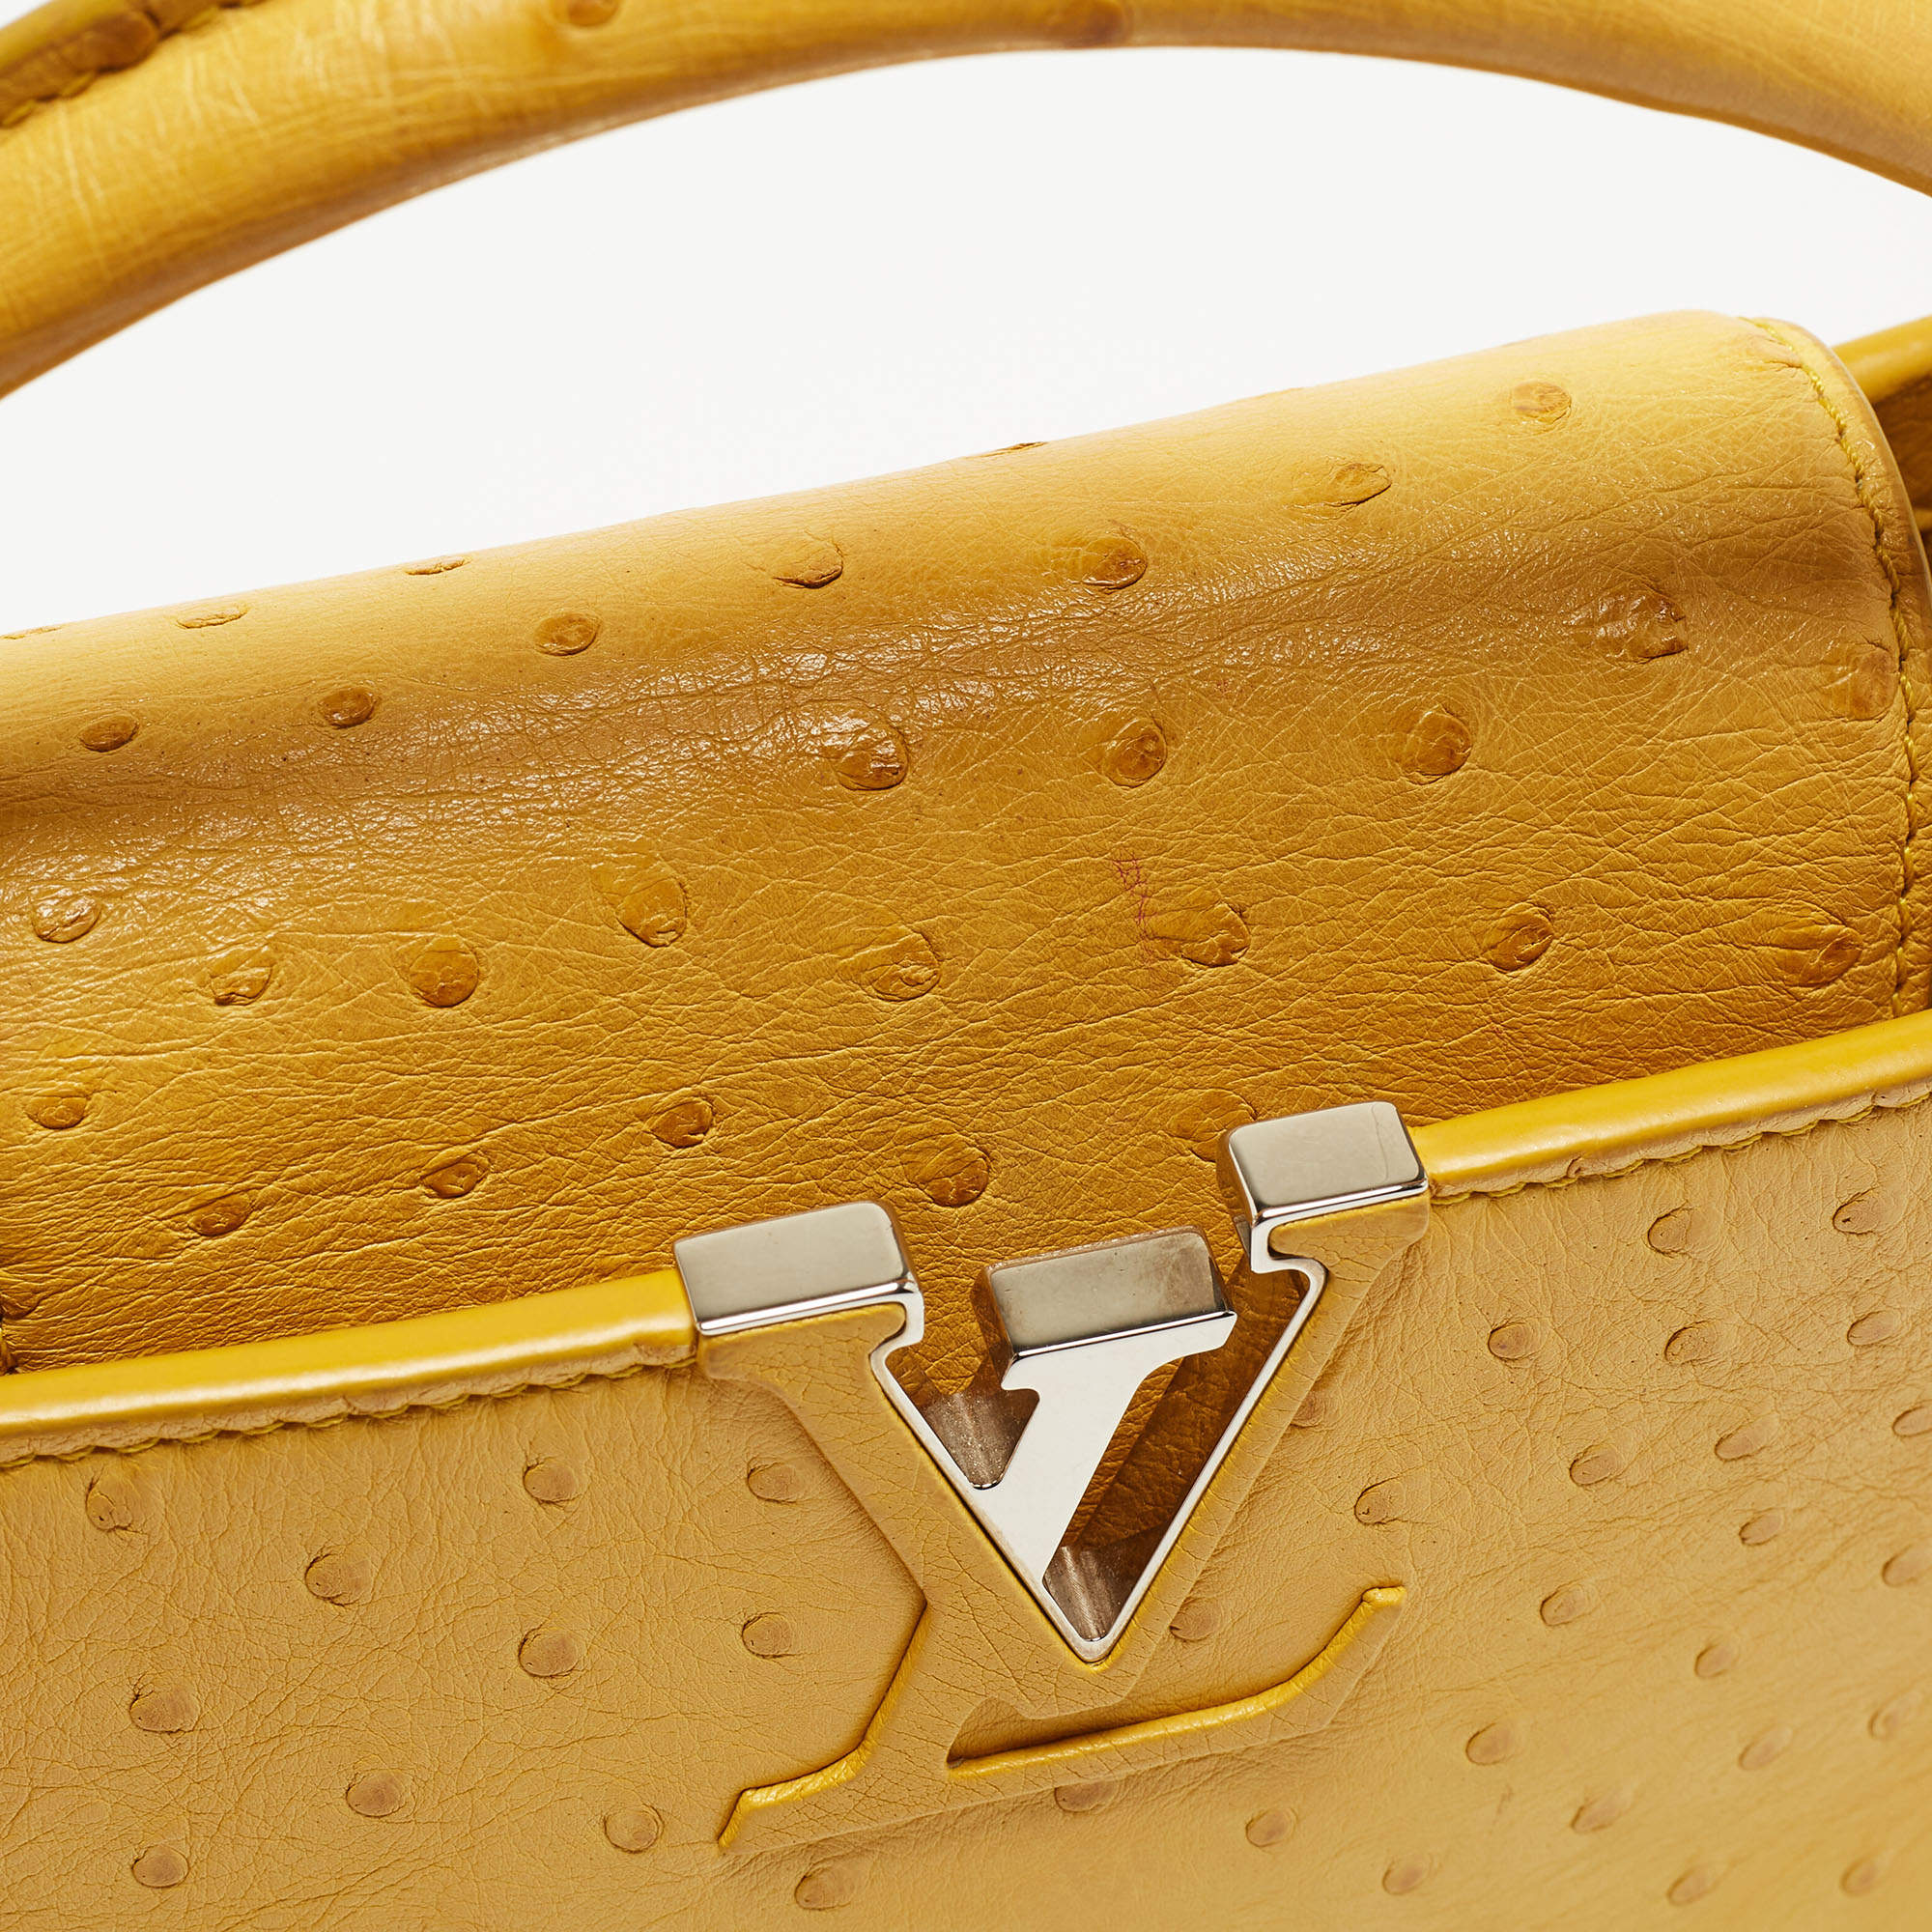 Louis Vuitton Yellow Ostrich Leather Capucines Bb Bag